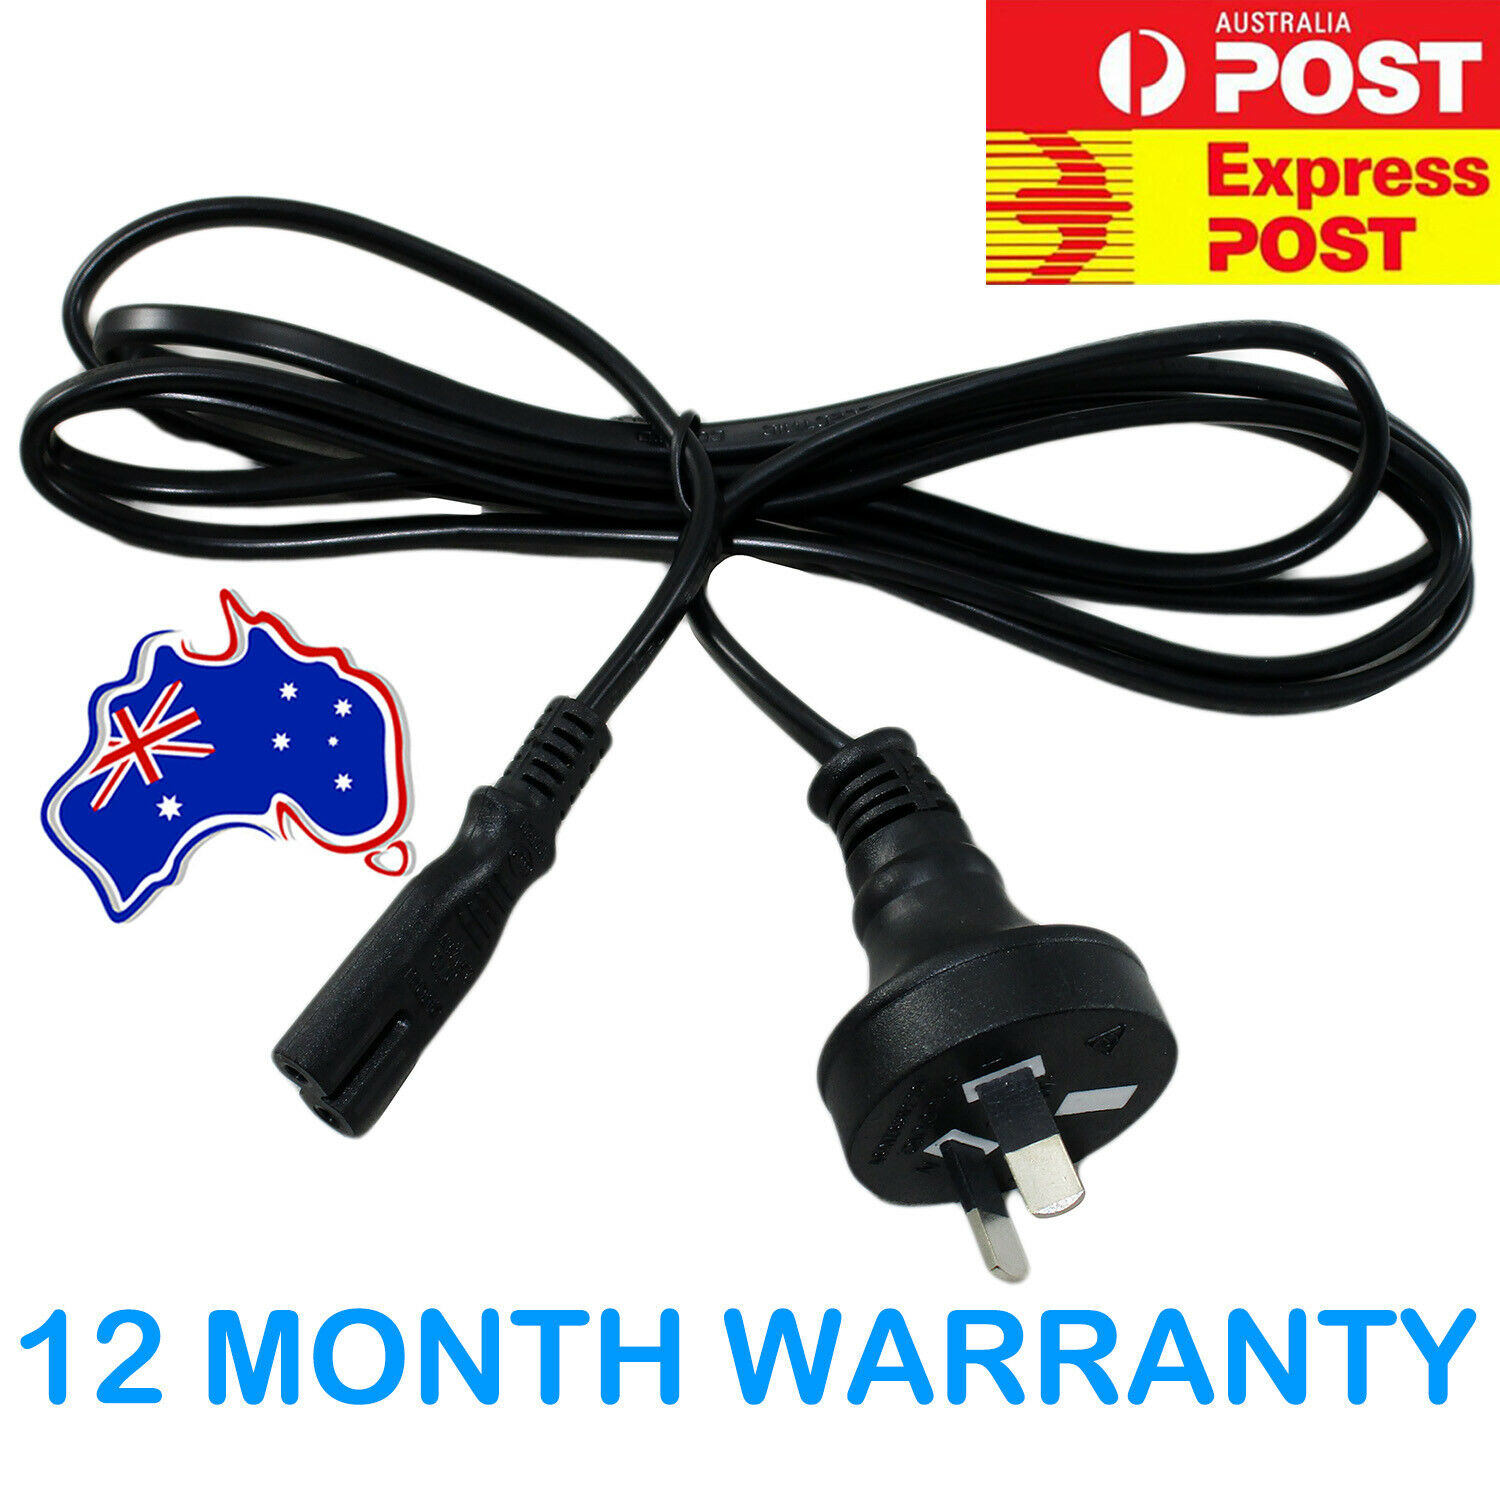 POWER CABLE/LEAD Replacement for Original Classic Microsoft XBox AU Plug Compatible Model: For Microsoft Xbox Platfo